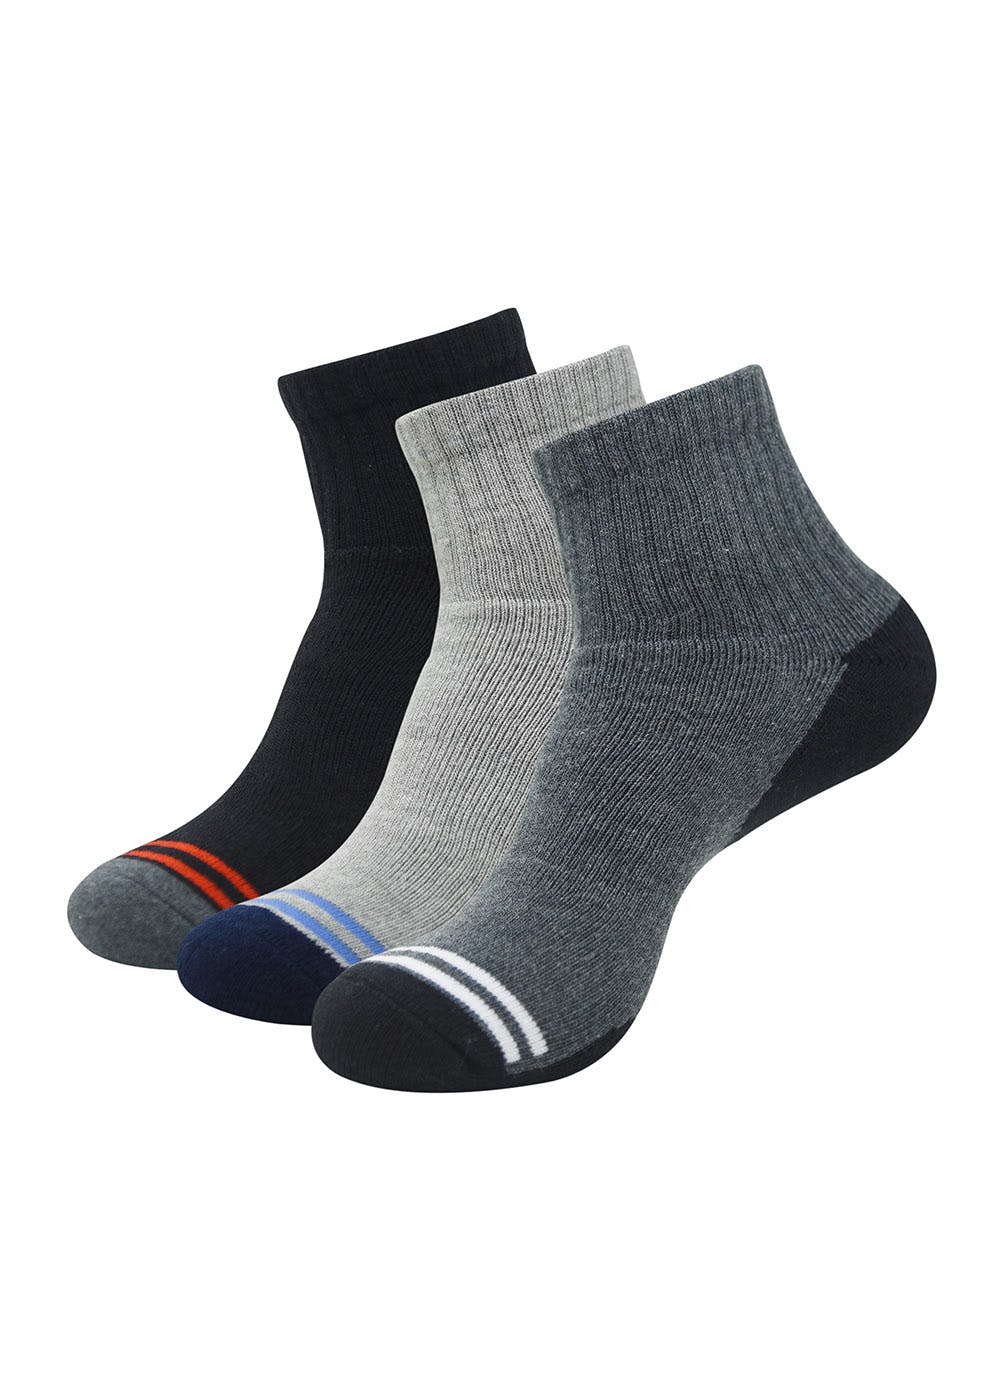 Get Set of 3 Grey Hue Cushioned High Ankle Socks at ₹ 327 | LBB Shop